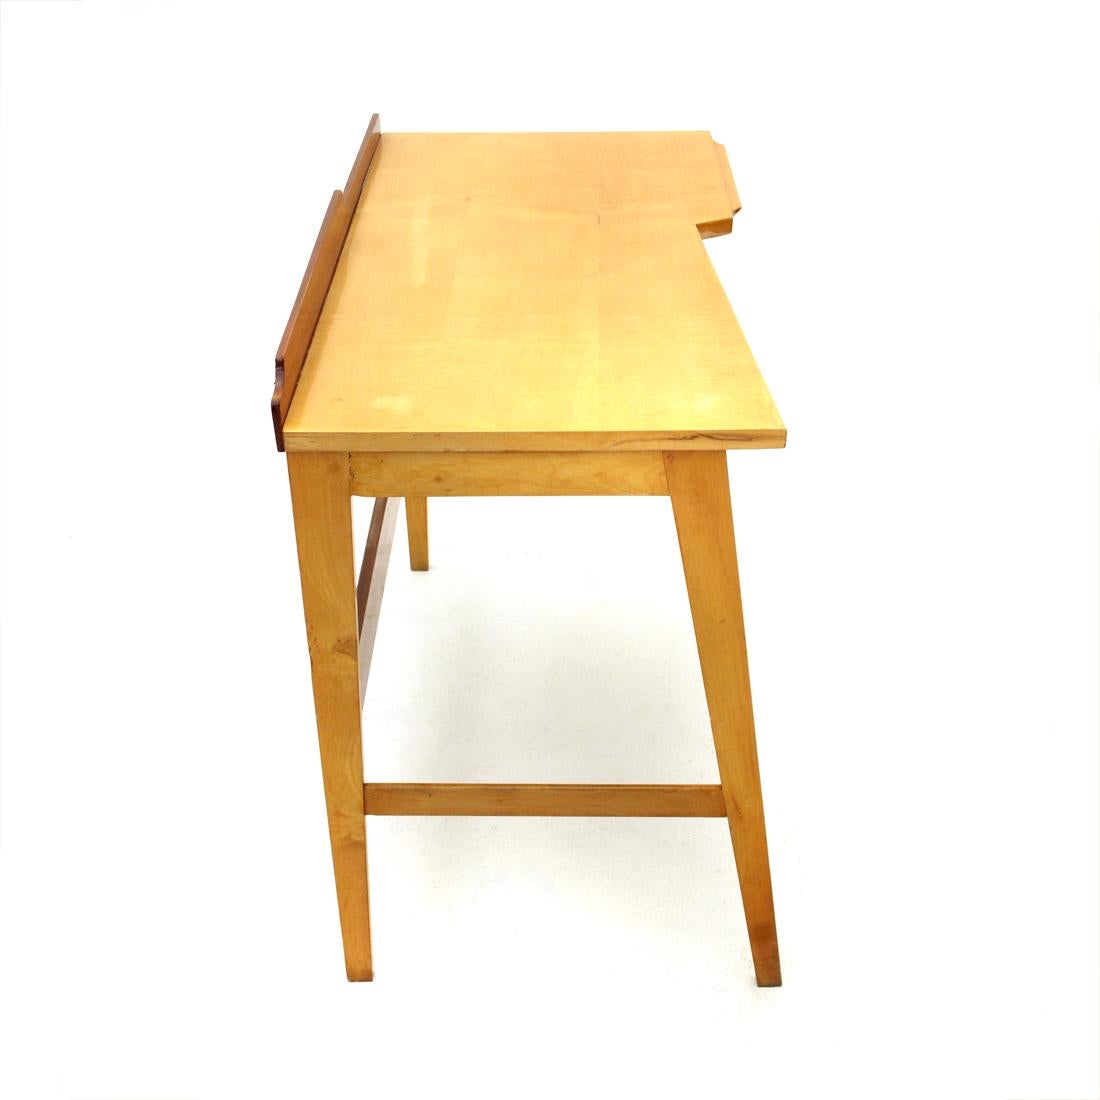 Italian made desk produced in the 1950s.
Solid wood structure.
Irregular shaped top in veneered wood with front edge.
Drawer with black painted metal handle.
Slightly inclined front legs that taper towards the end.
Good general condition, some